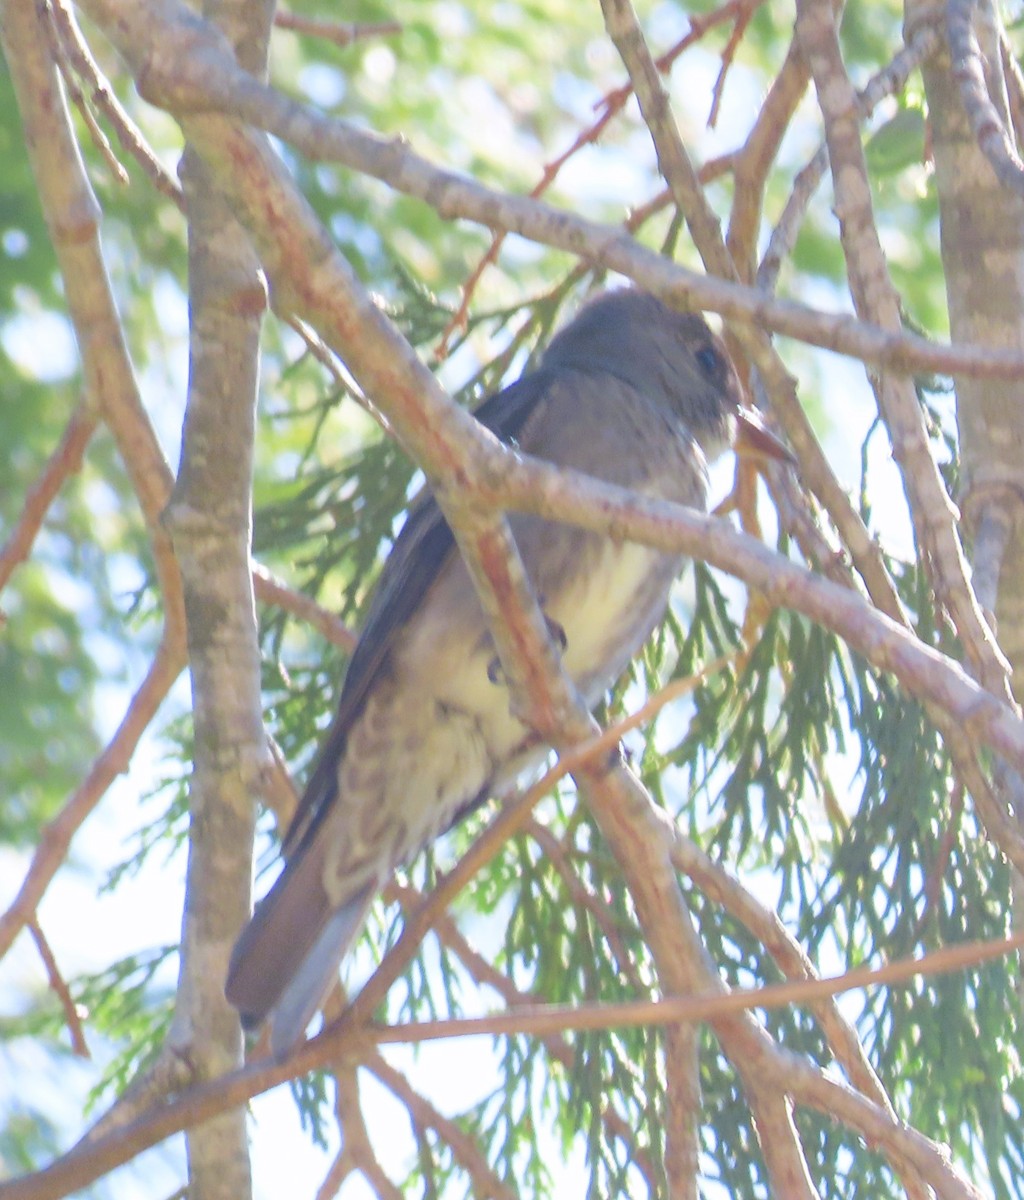 Olive-sided Flycatcher - The Spotting Twohees